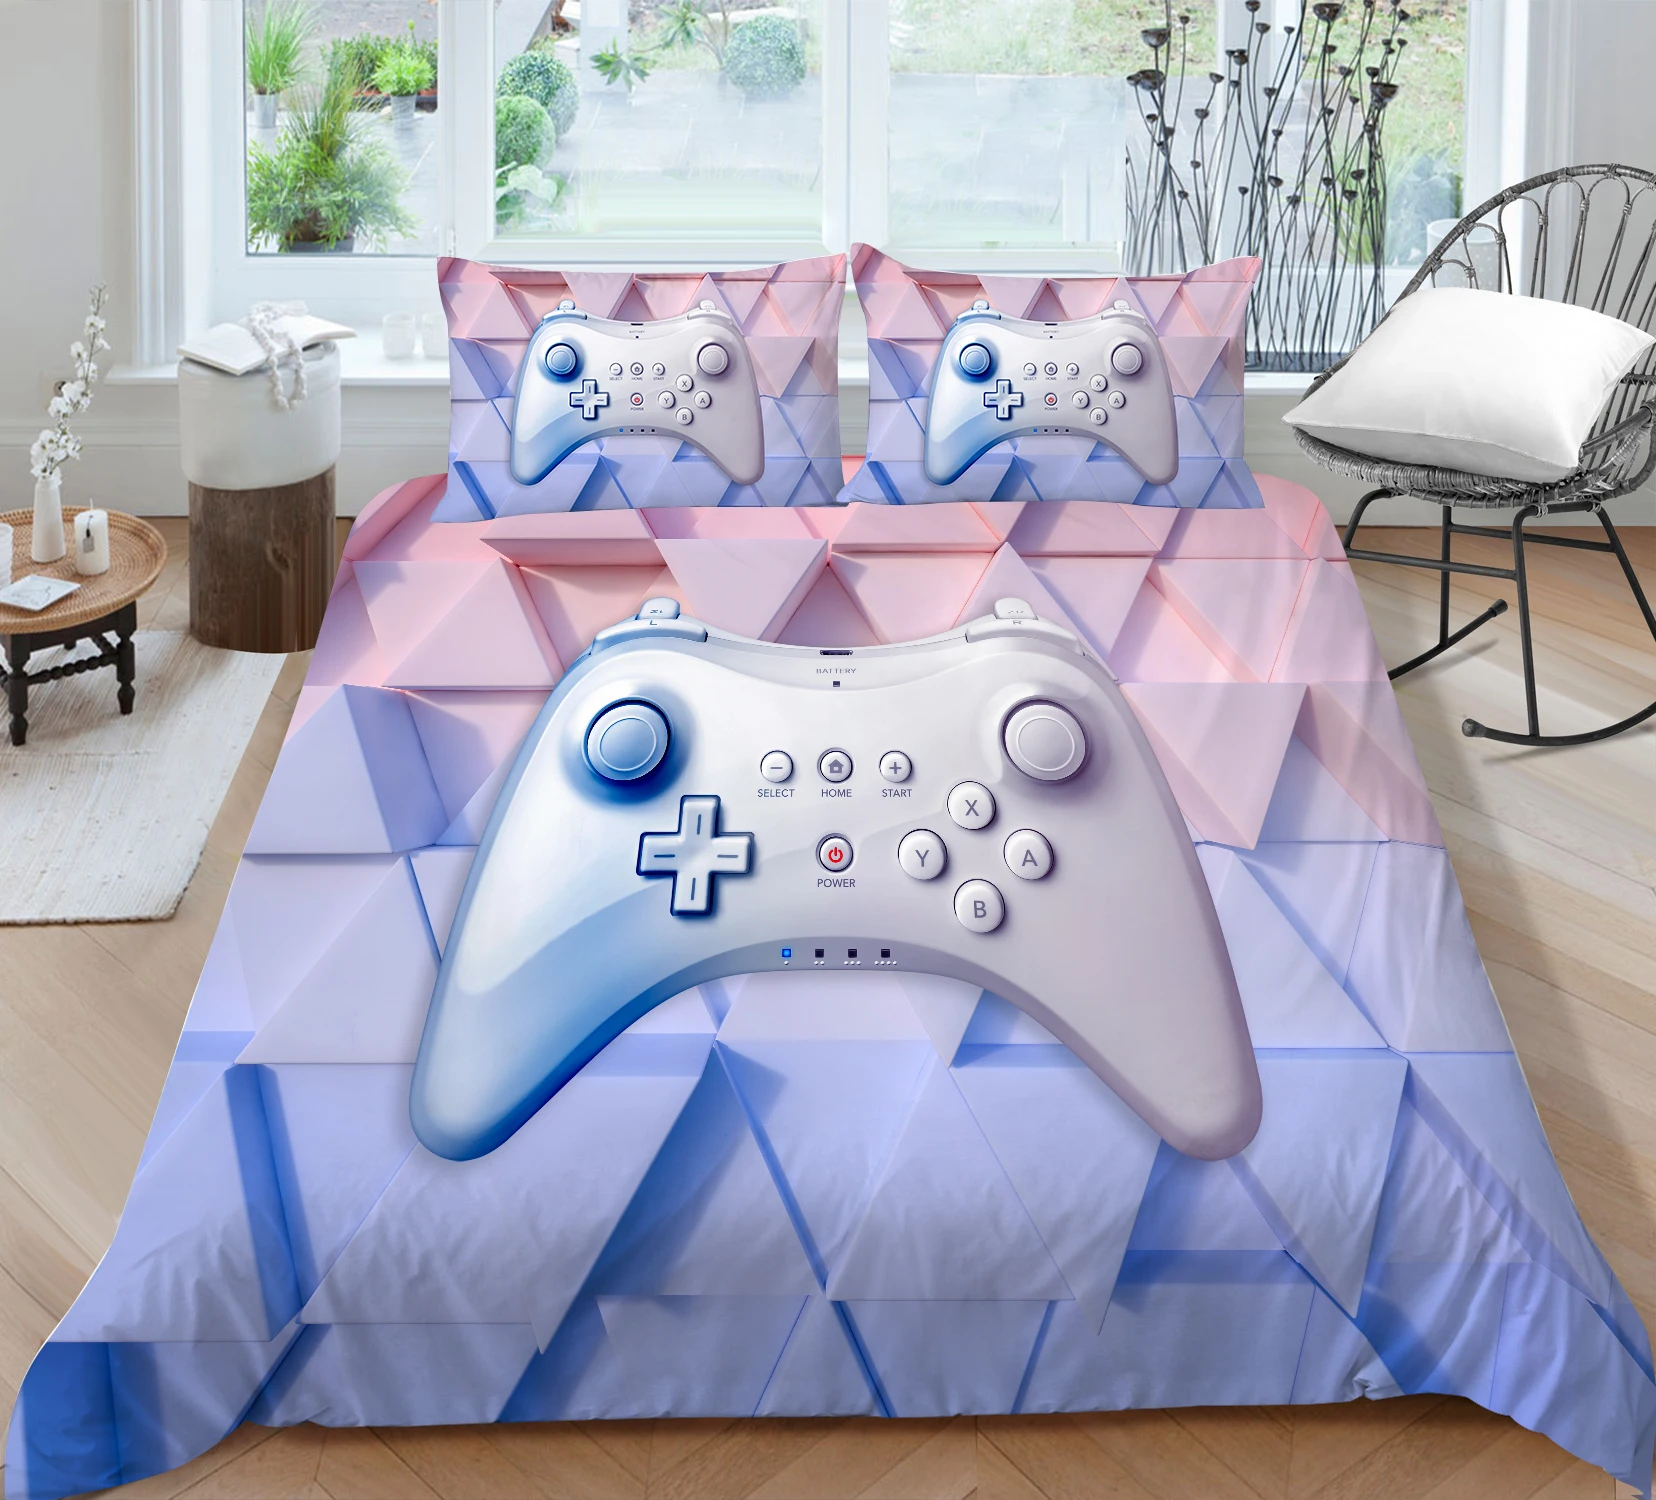 

Pink and Blue Triangle with Gamepad Printing Bedclothes Duvet cover with pillowcases Twin Full Queen King sizes 2/3pcs